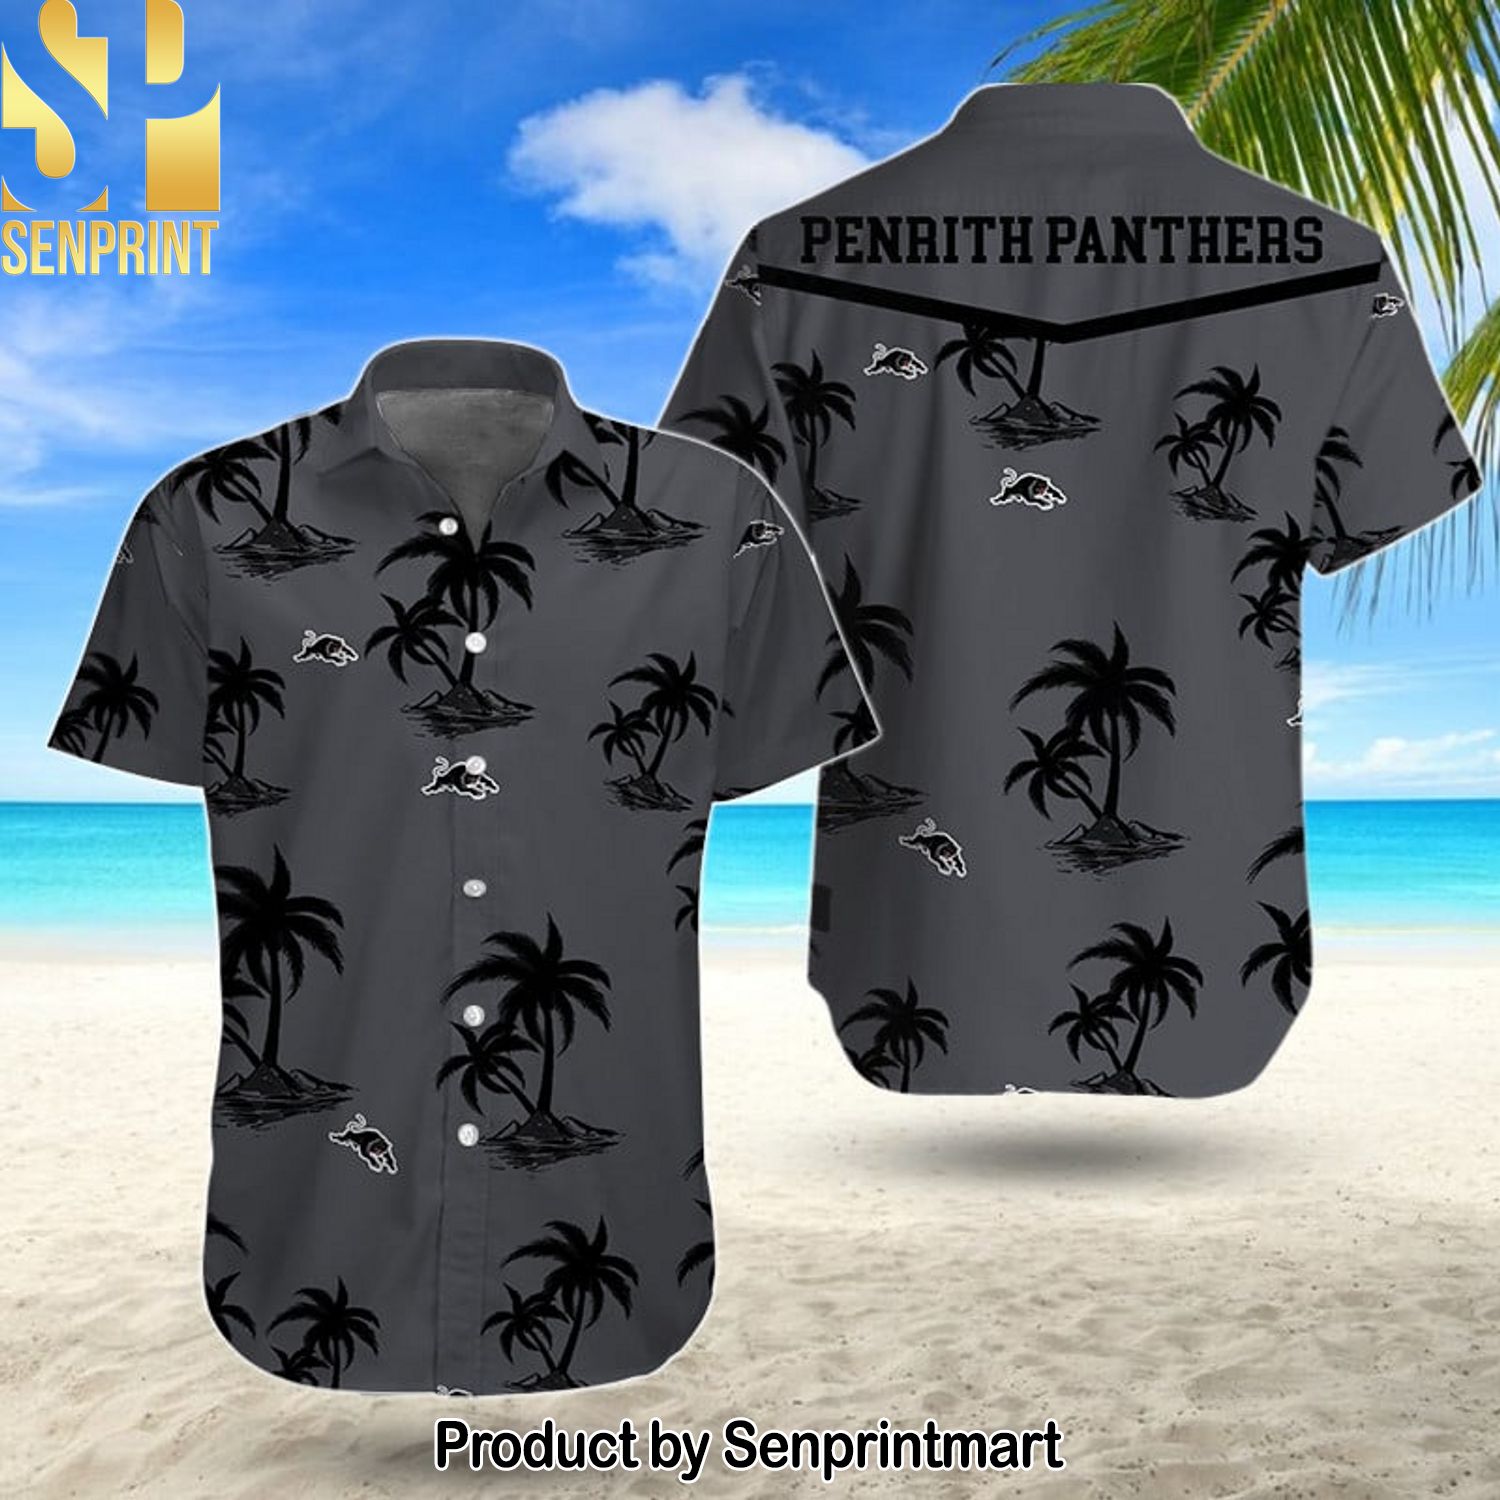 NRL Penrith Panthers Hot Outfit All Over Print Hawaiian Print Aloha Button Down Short Sleeve Shirt